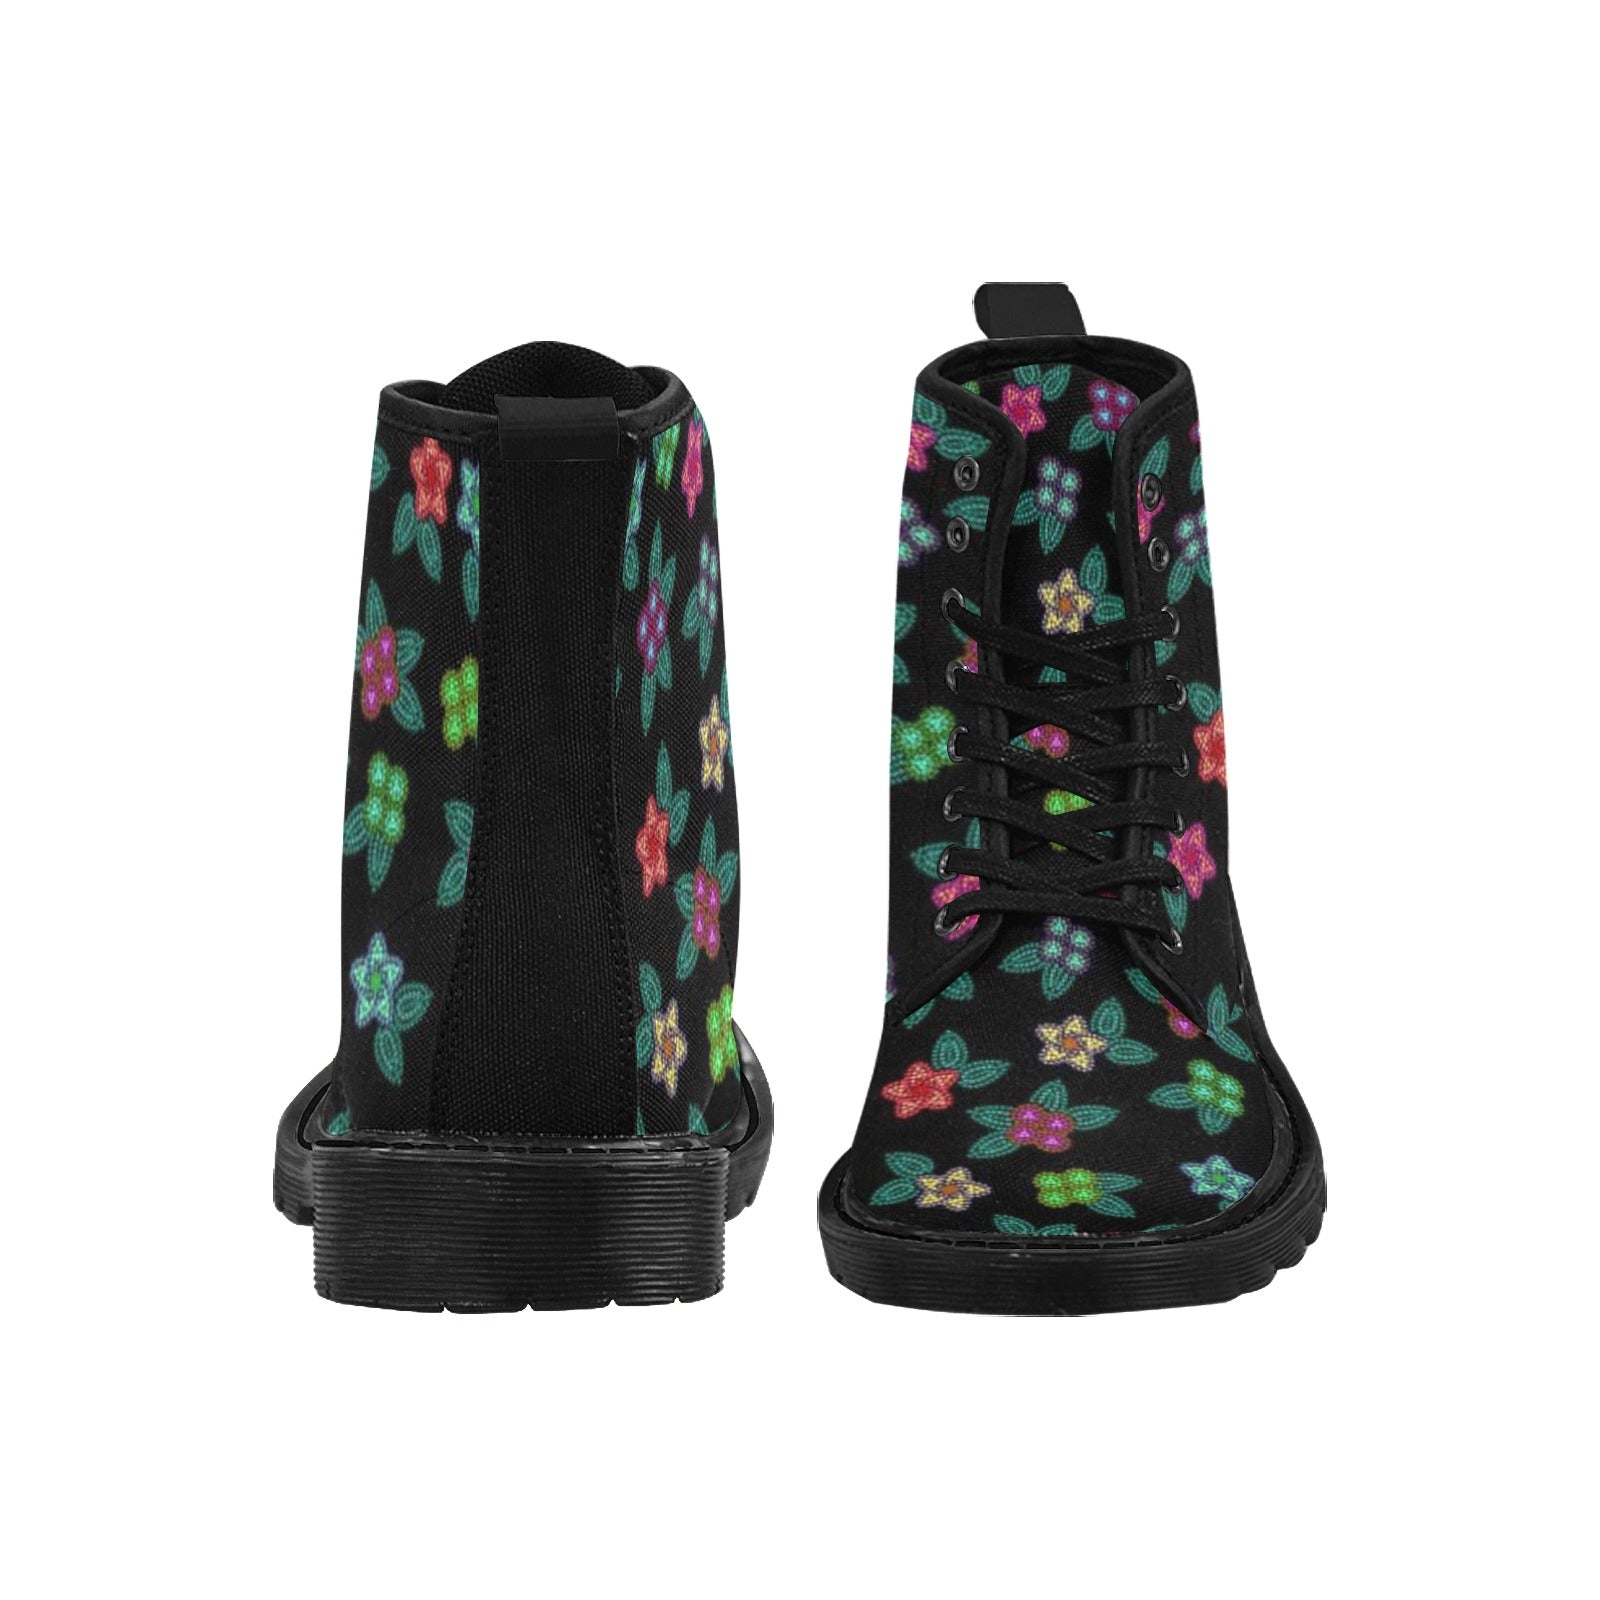 Berry Flowers Black Boots for Women (Black)